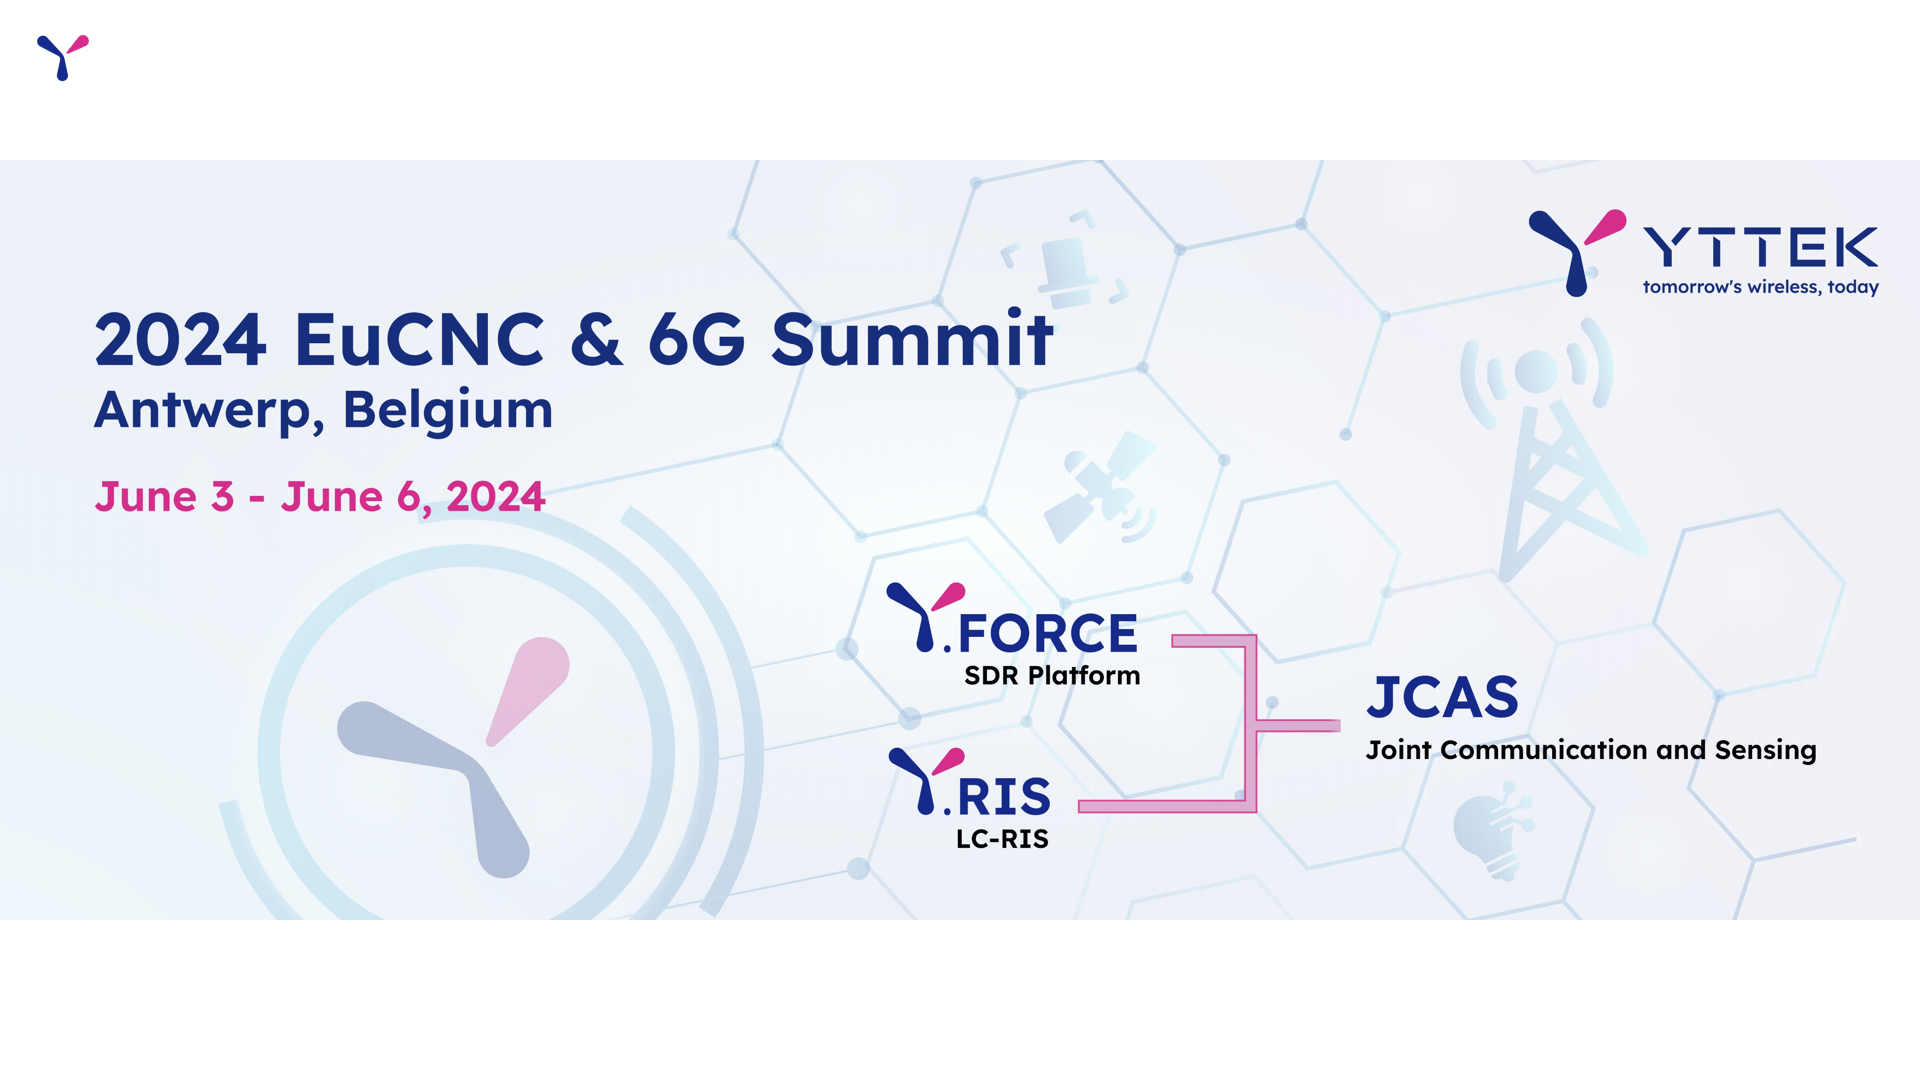 YTTEK will Showcase Wireless Research Equipment at EuCNC and the 6G Summit 2024